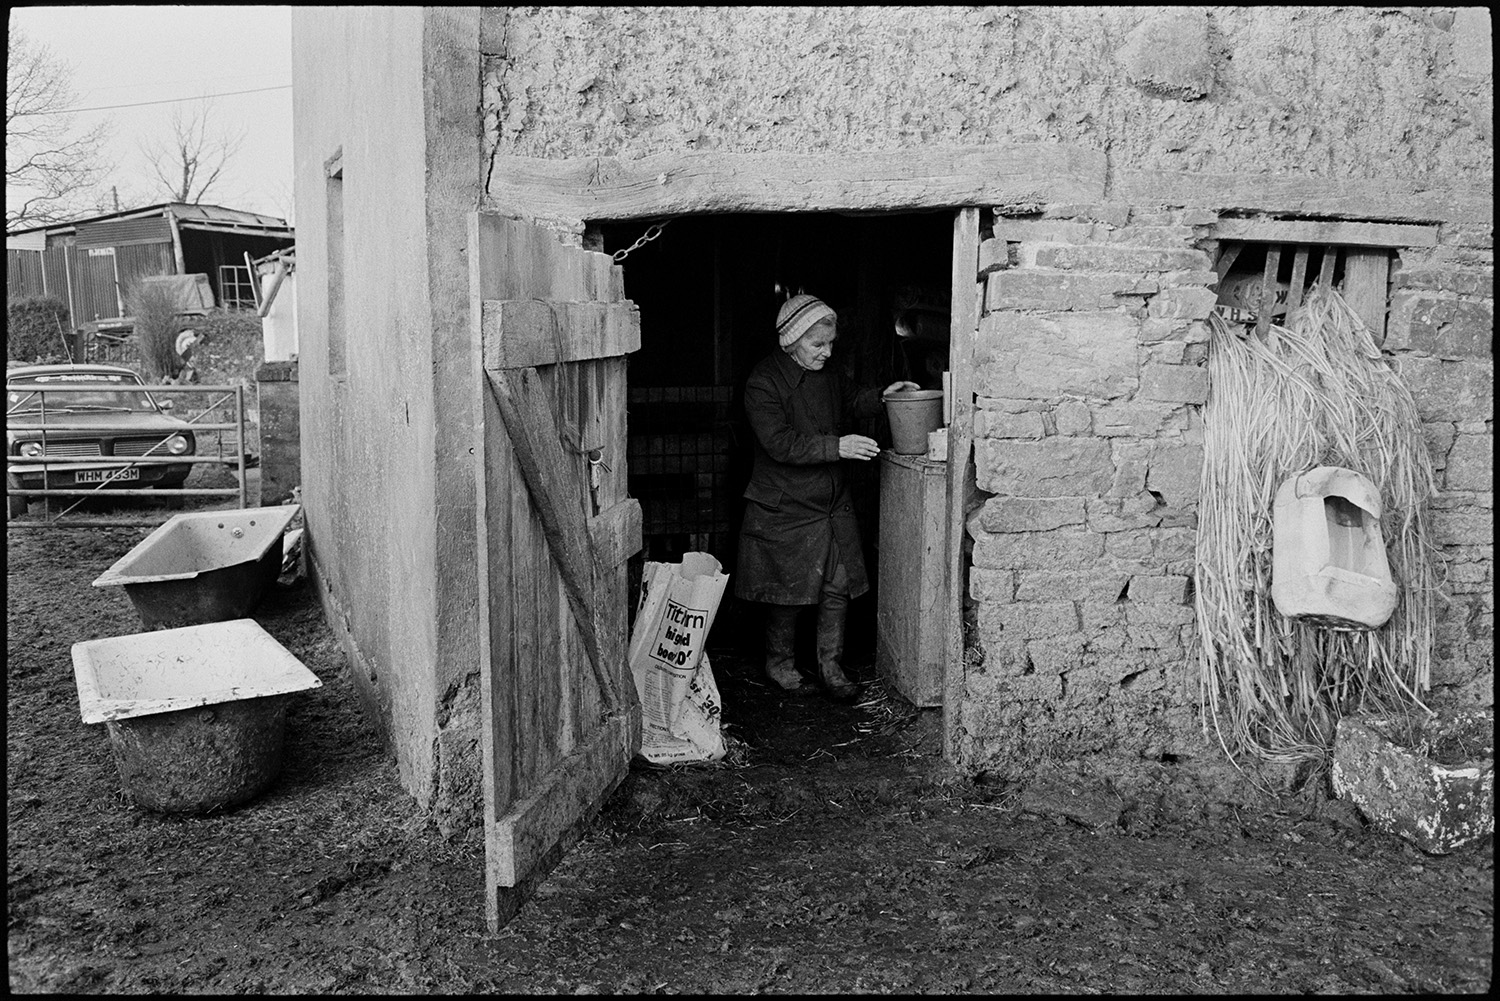 Farmers in milking parlour, churn. 
[Evelyn Folland in the doorway to a stone and cob barn at Higher Upcott, Dowland. Twine is hanging from a window of the barn, and two bath tubs are in the muddy farmyard outside the barn. A car is parked by a gate in the background.]